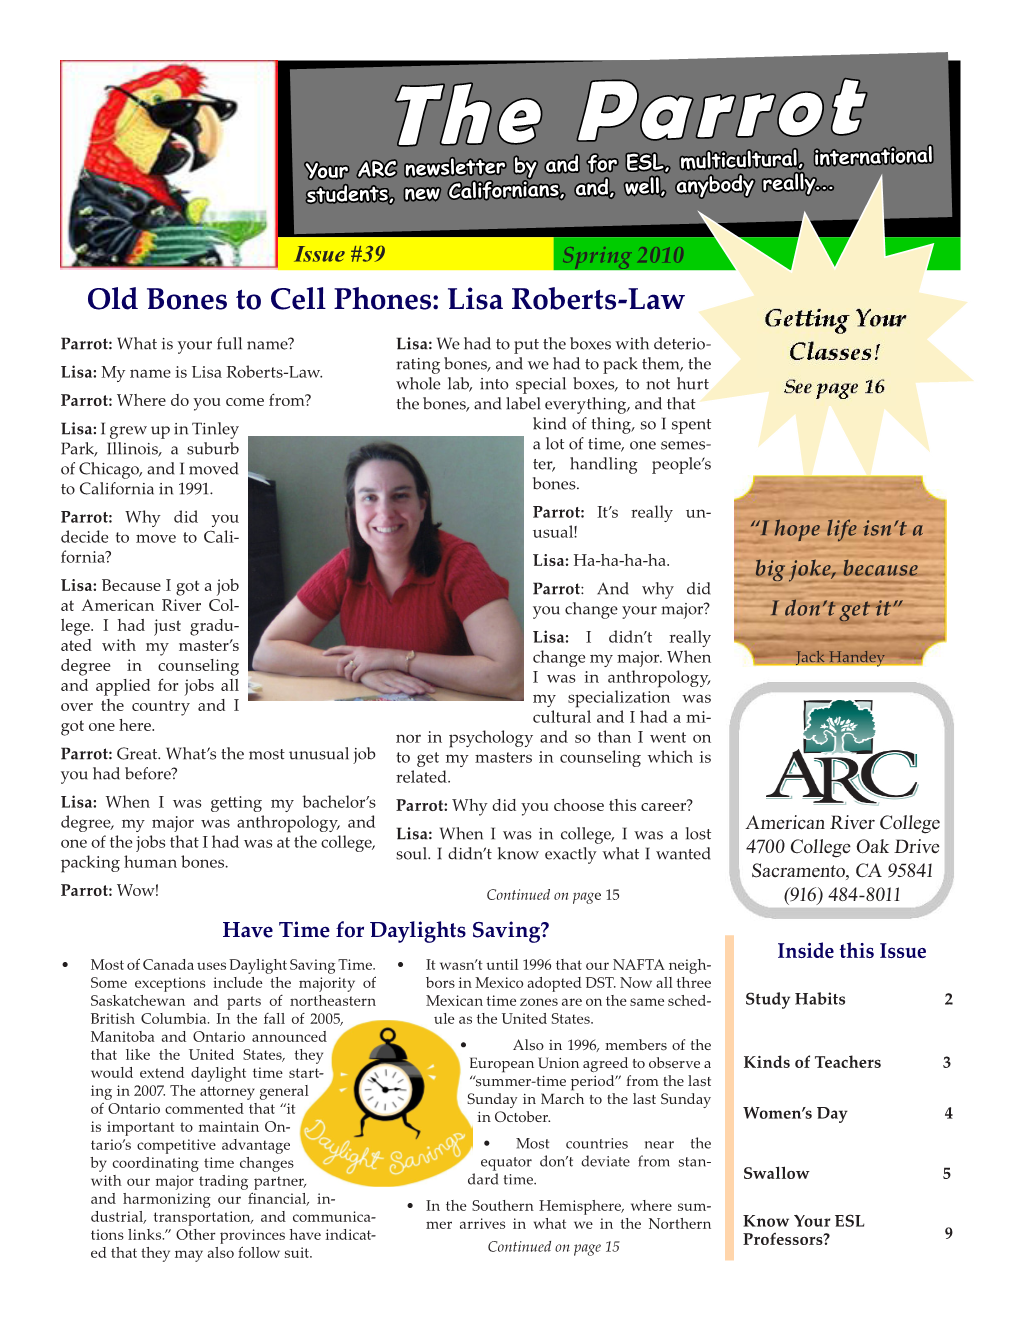 The Parrot Your ARC Newsletter by and for ESL, Multicultural, International Students, New Californians, And, Well, Anybody Really